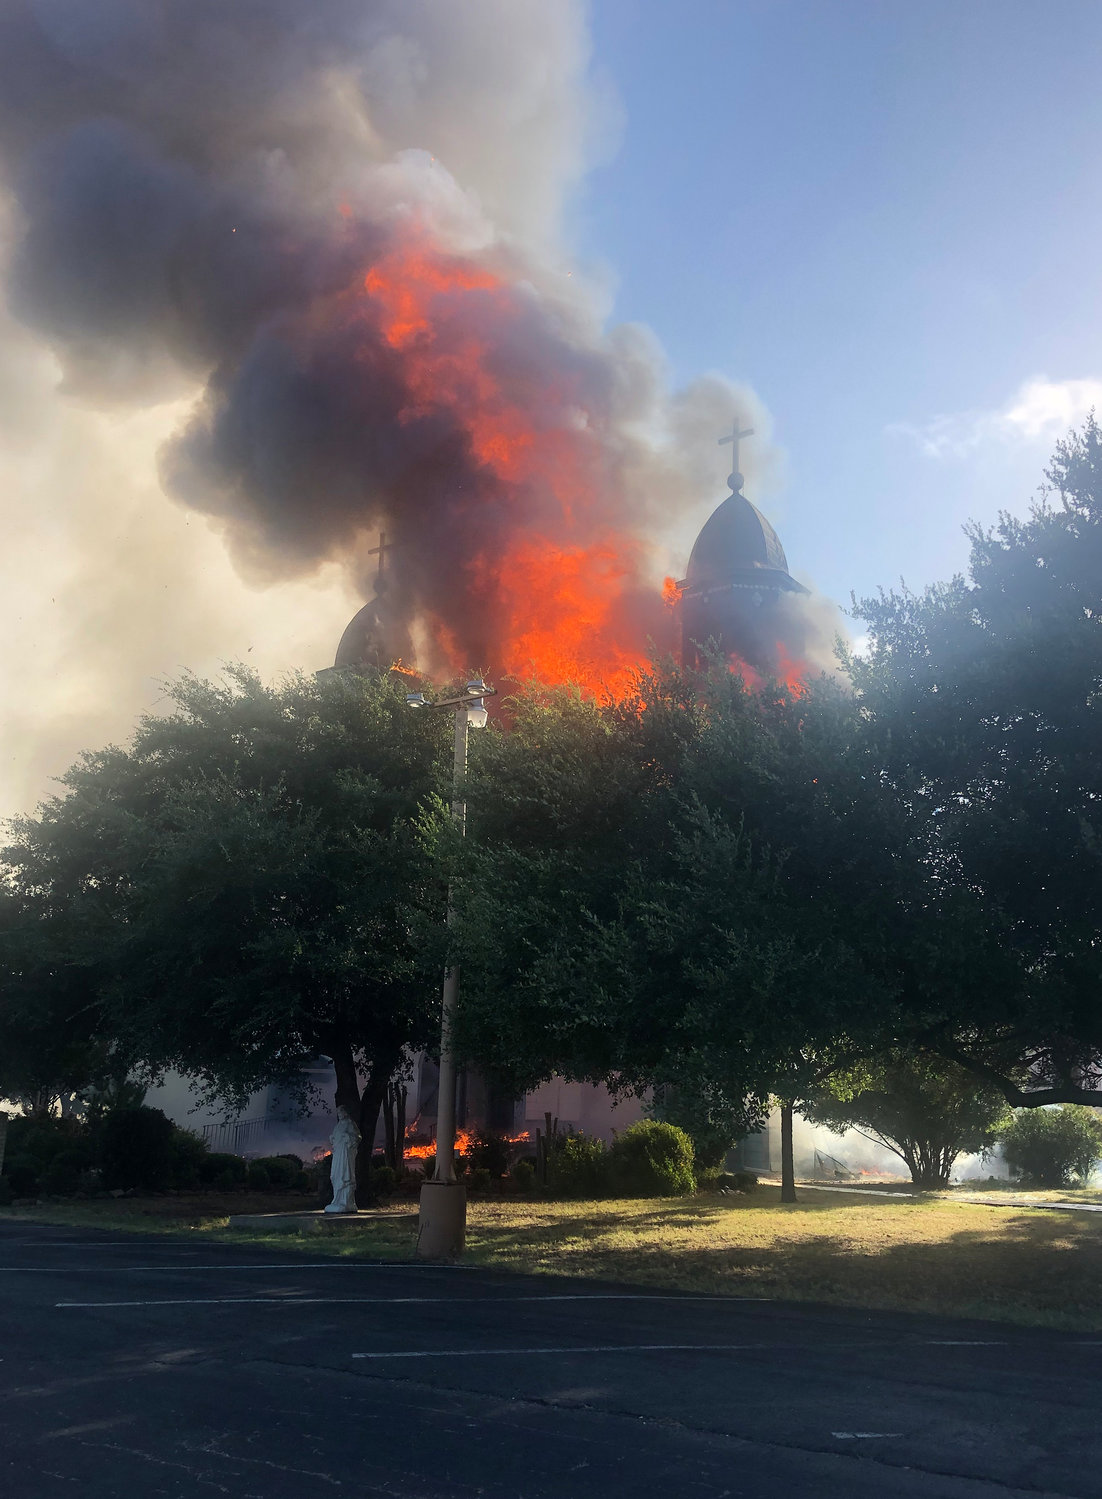 Flames and smoke billow out of the Church of the Visitation in Westphalia, Texas, July, 29, 2019. The nearly 125-year old wooden church with bell towers on each side, burned to the ground that morning. Since 1883 the parish has served the Catholic community of southwestern Falls County, many of whom are descendents of immigrants from the northwest German region of Westphalia.